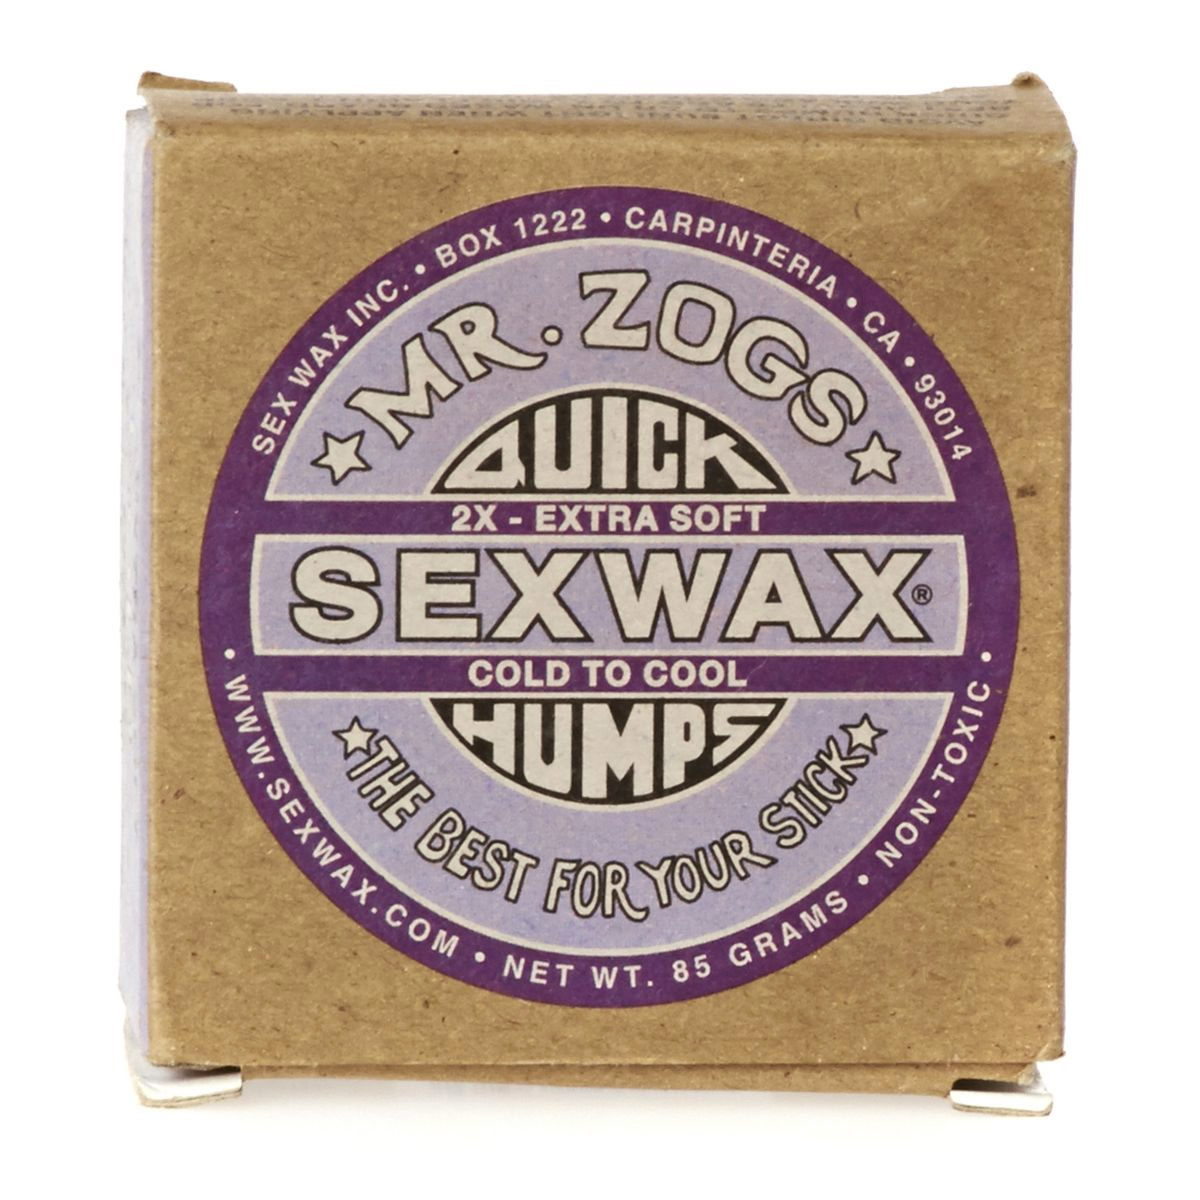 SEXWAX. The cool and the Cold. Cold softness. Mild cold